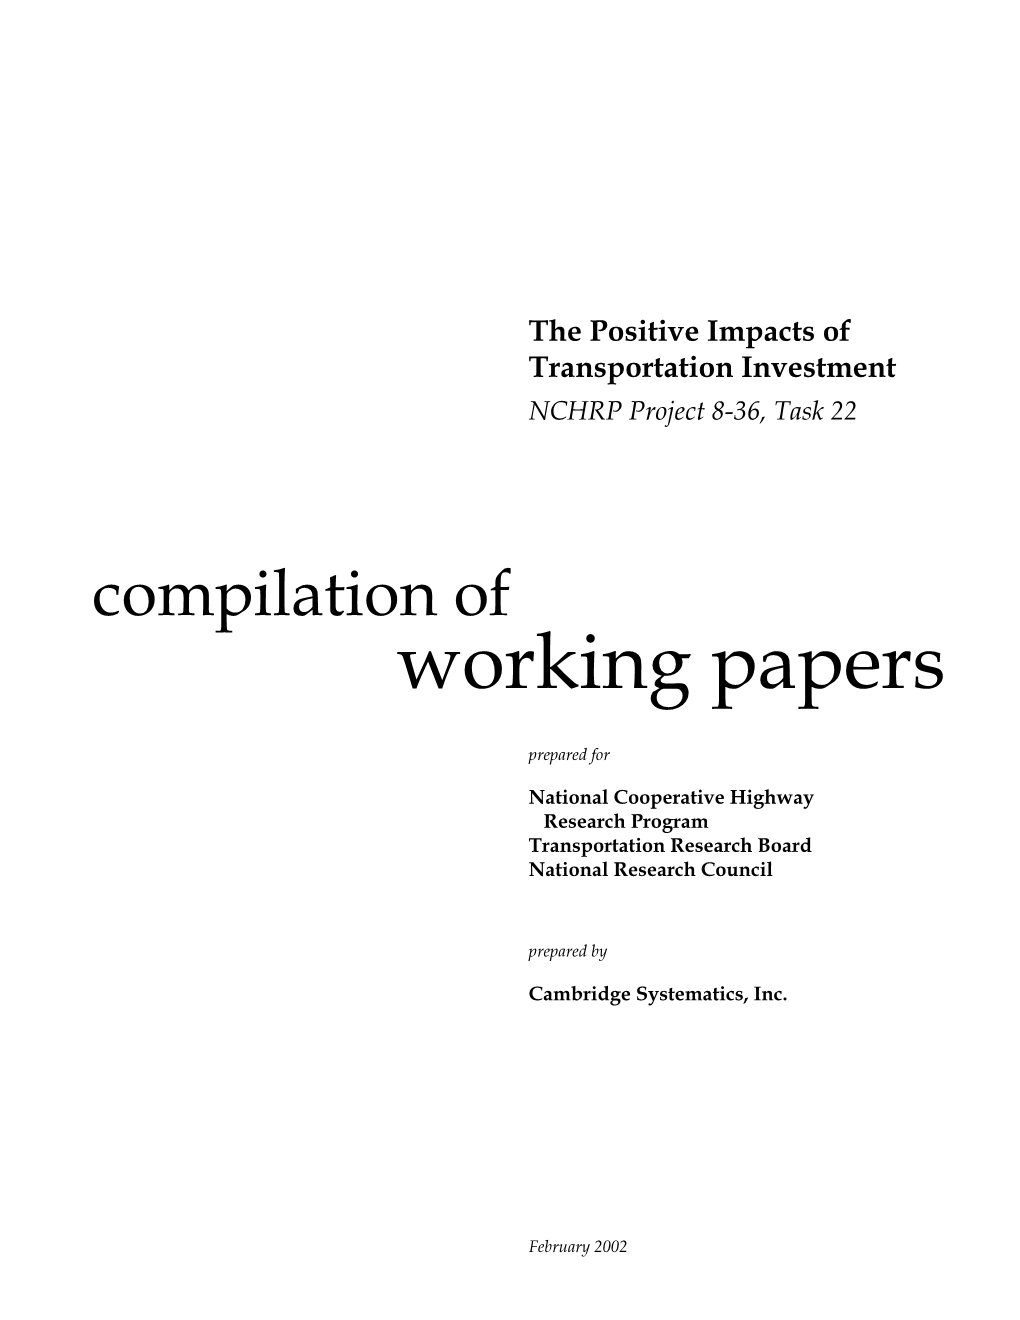 The Positive Impacts of Transportation Investment NCHRP Project 8-36, Task 22 Compilation of Working Papers